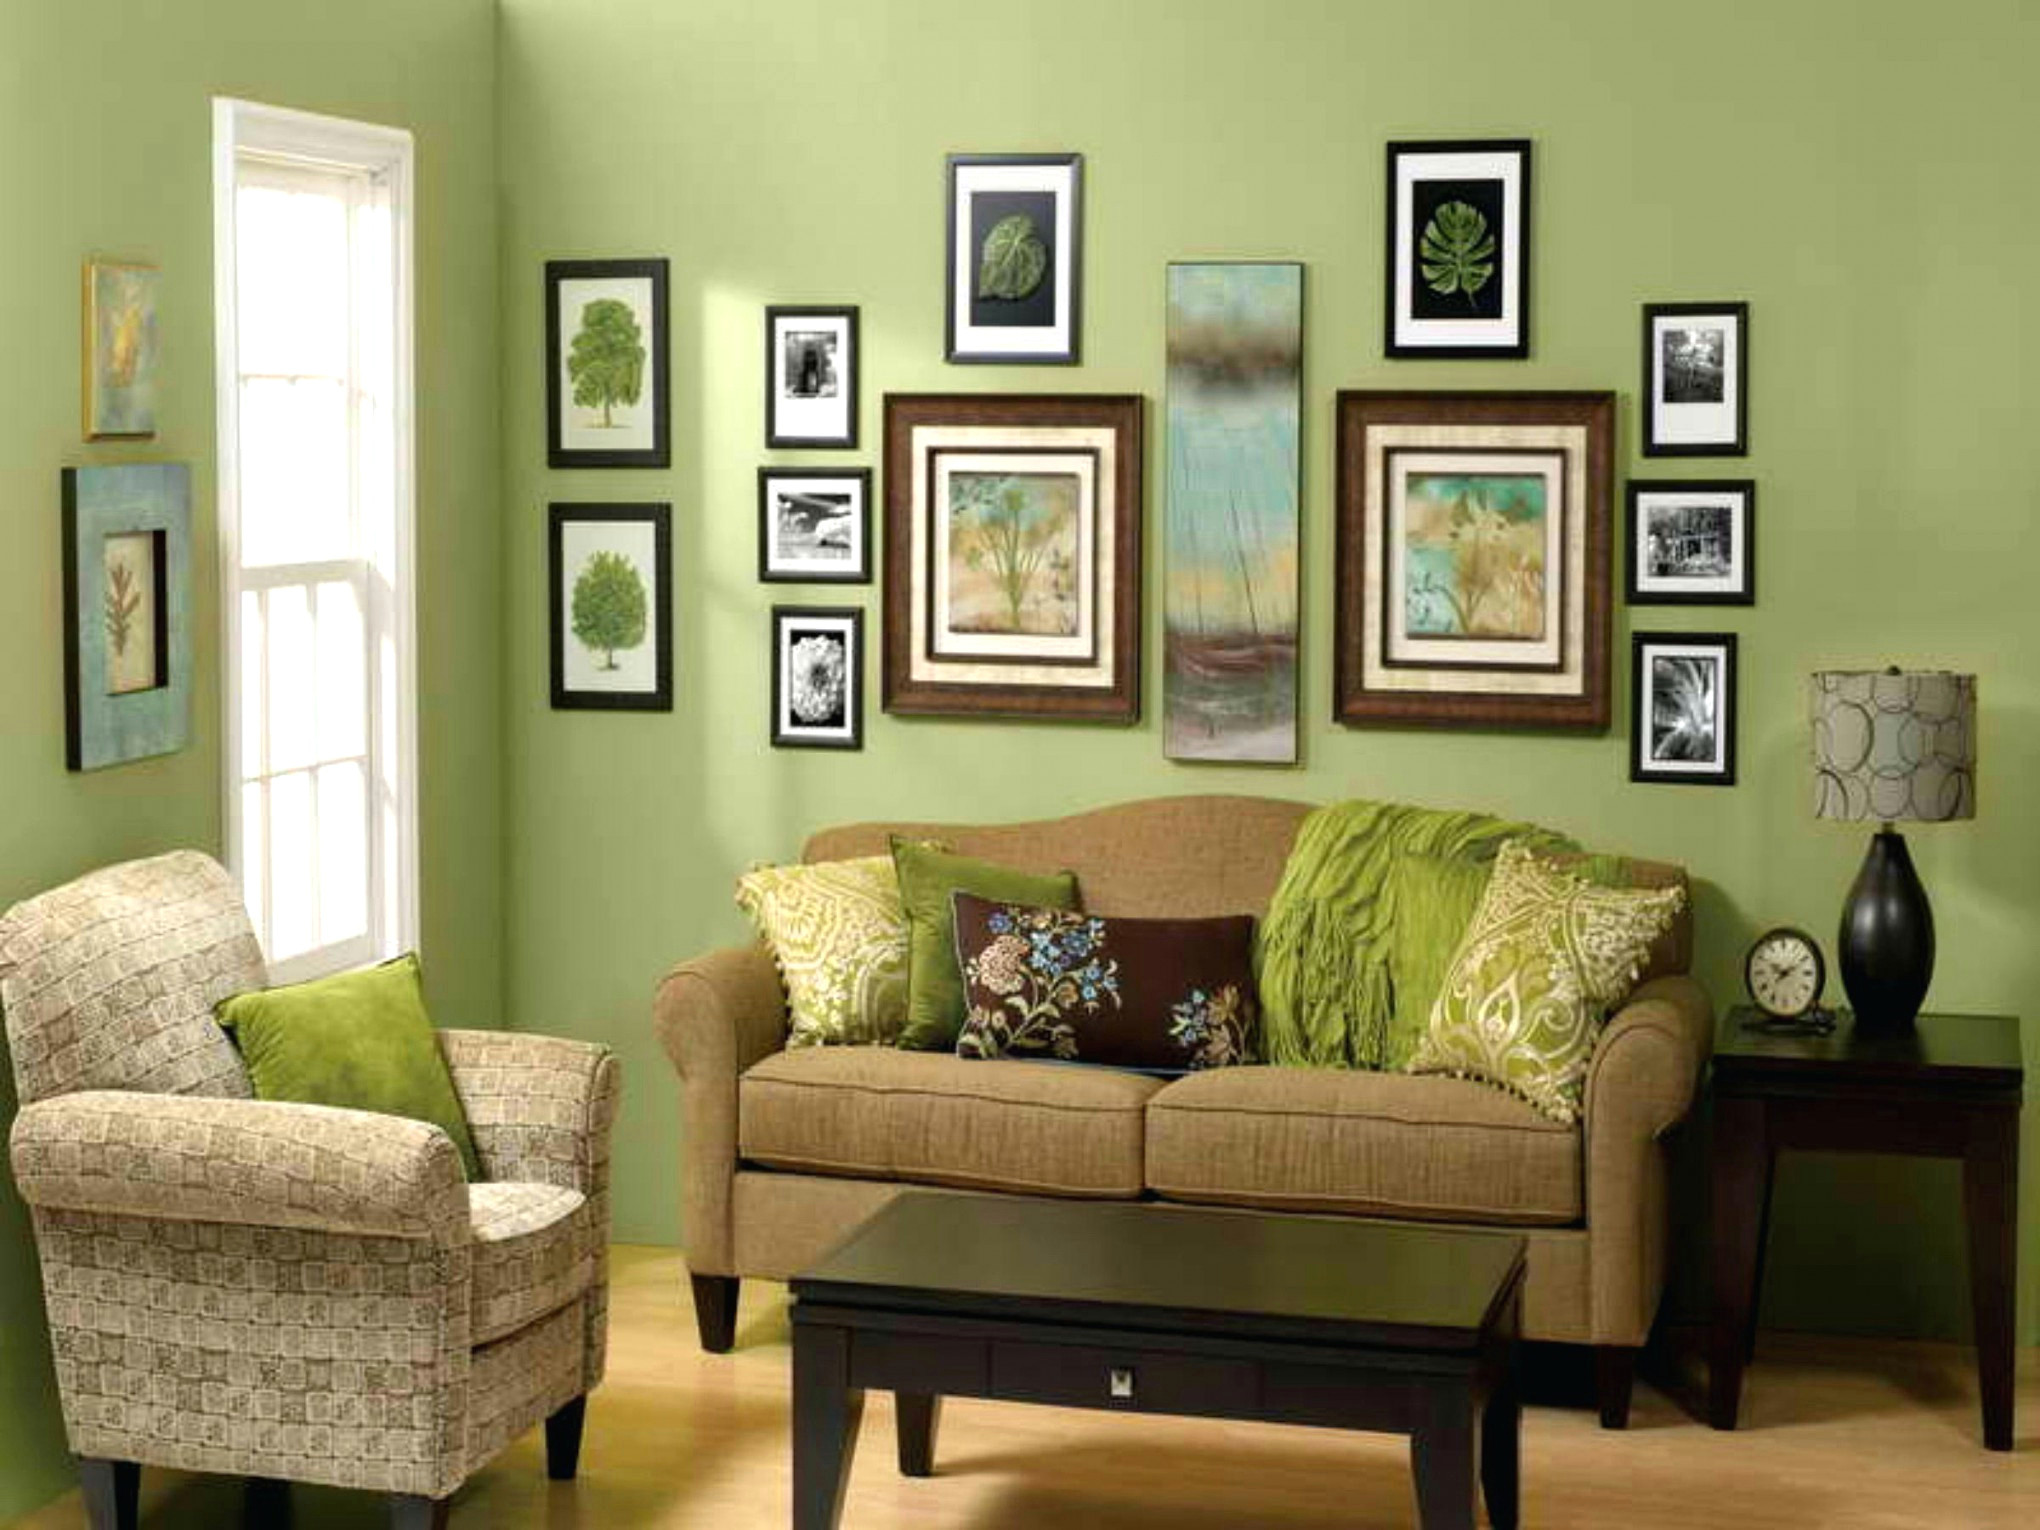 Cute Drawing Room Traditional Wall Decor Ideas Cute Living Room Traditional Decorating